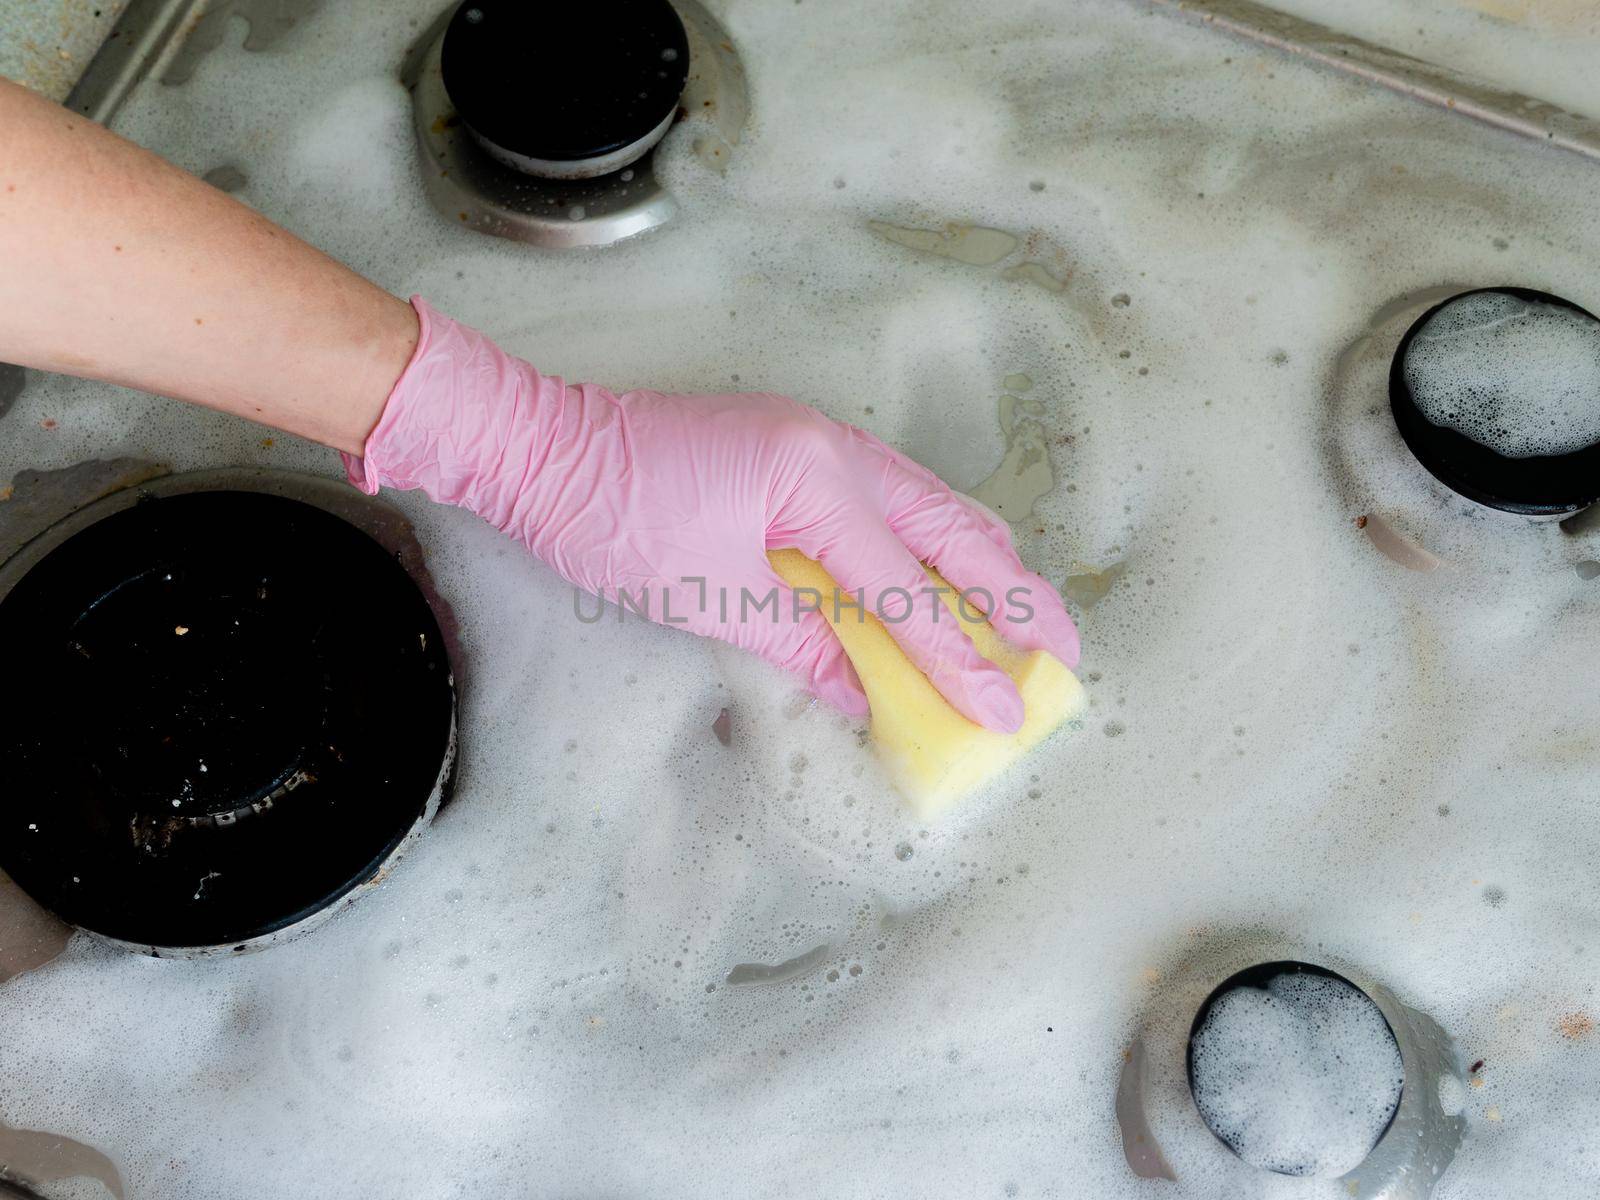 Close-up, a washcloth in the hands of gloved hands carefully washes the gas stove.